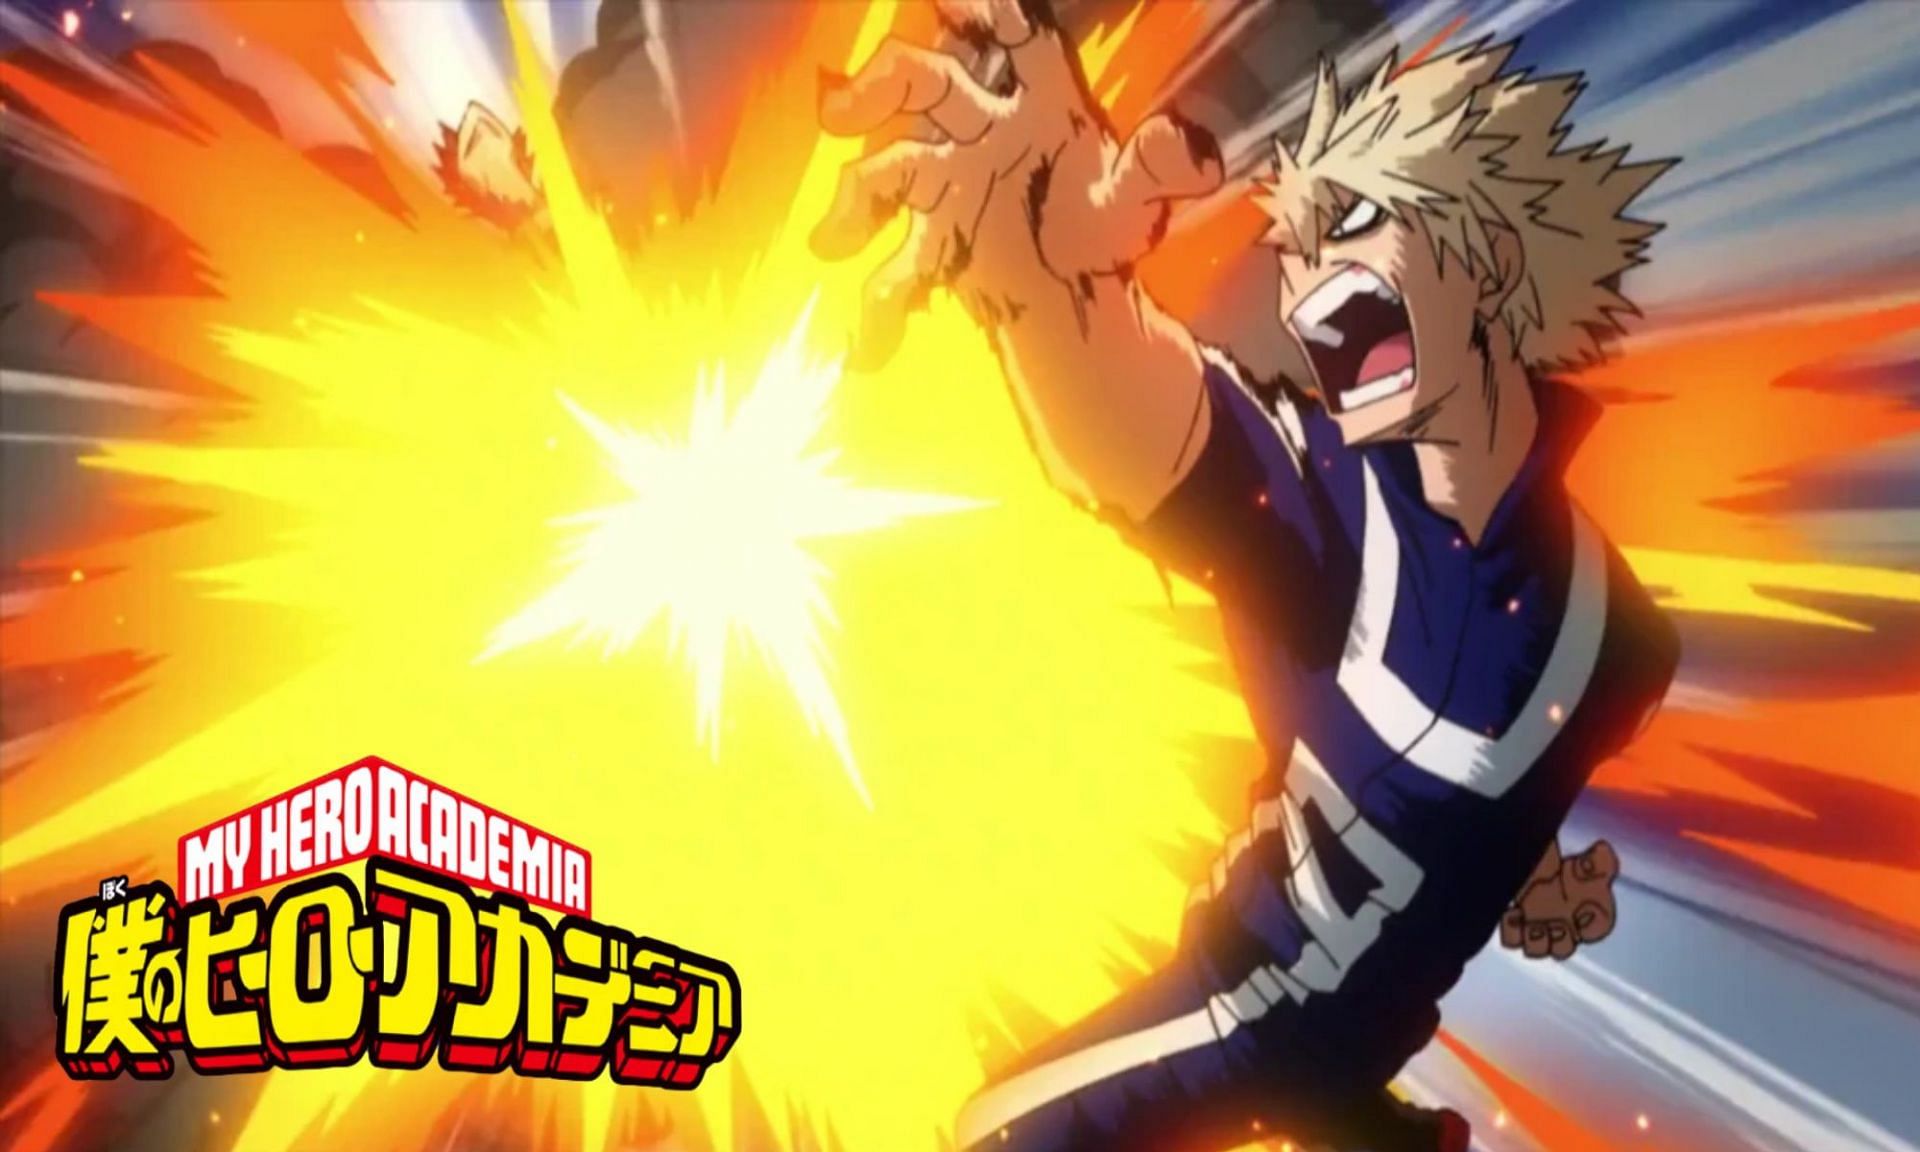 Out Of Every Quirk In My Hero Academia, This One Stands Above The Rest